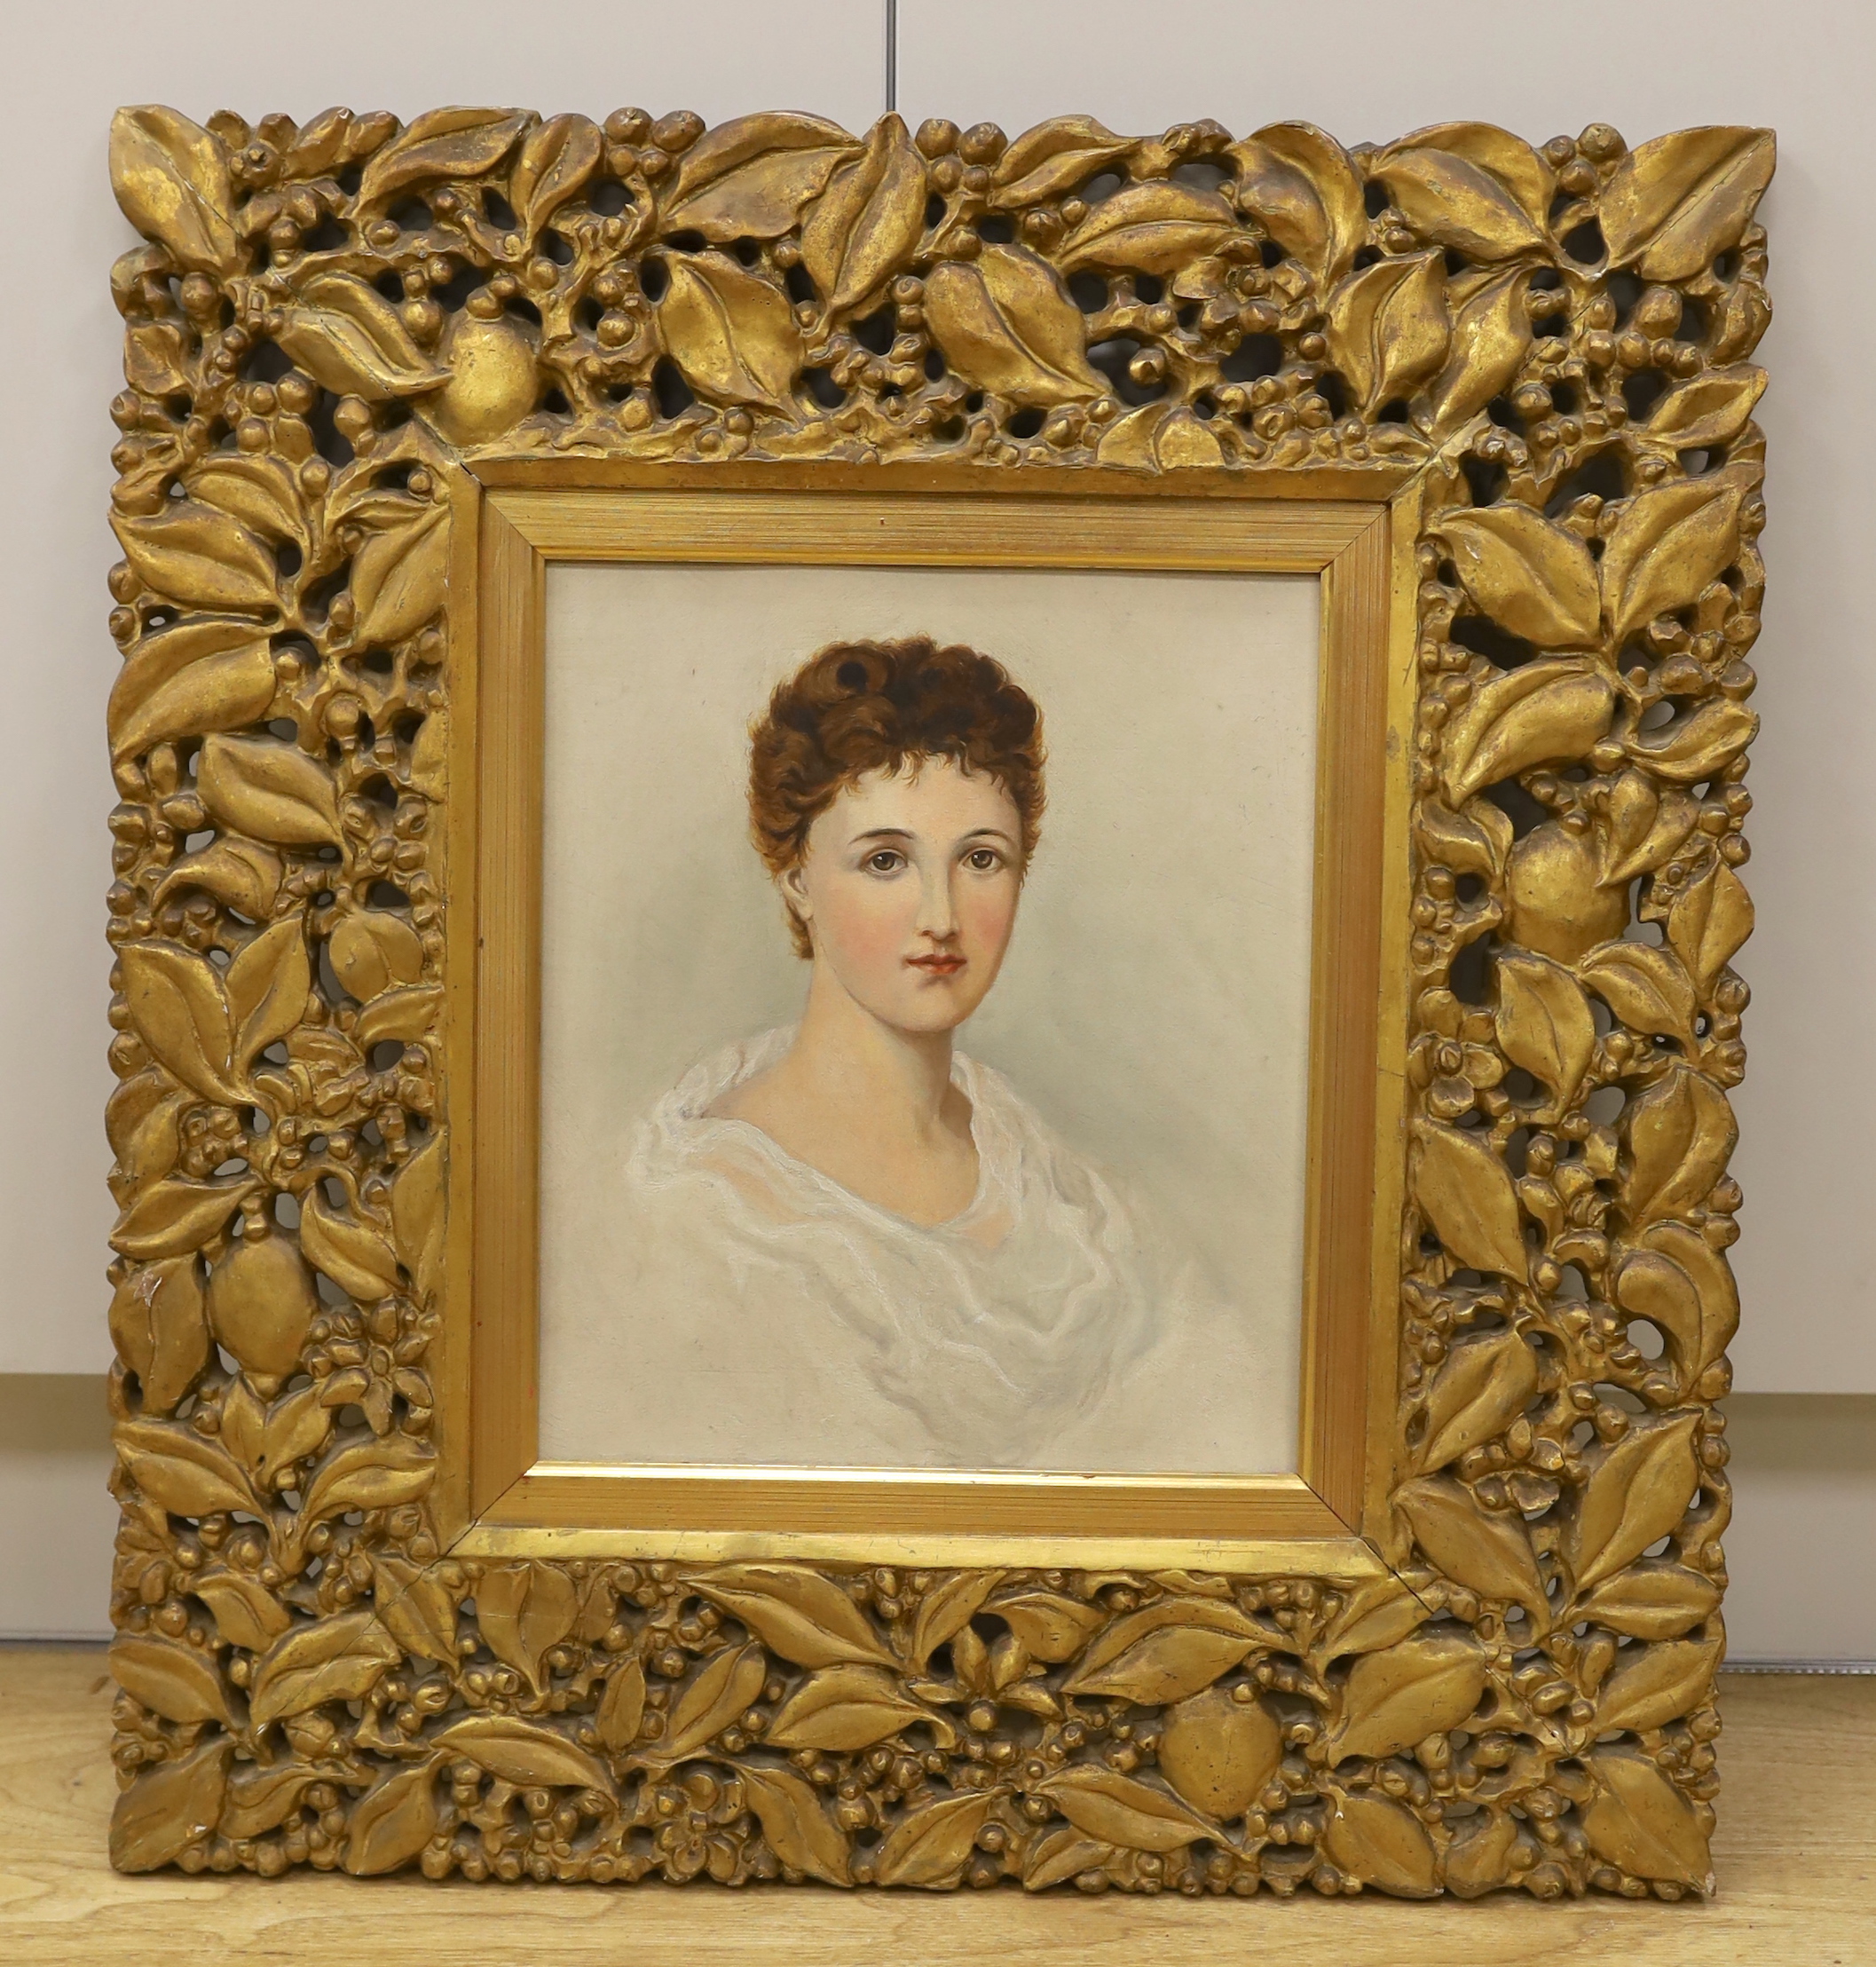 Oil on canvas, Portrait of a lady, housed in an ornate gilt frame, 33 x 28cm